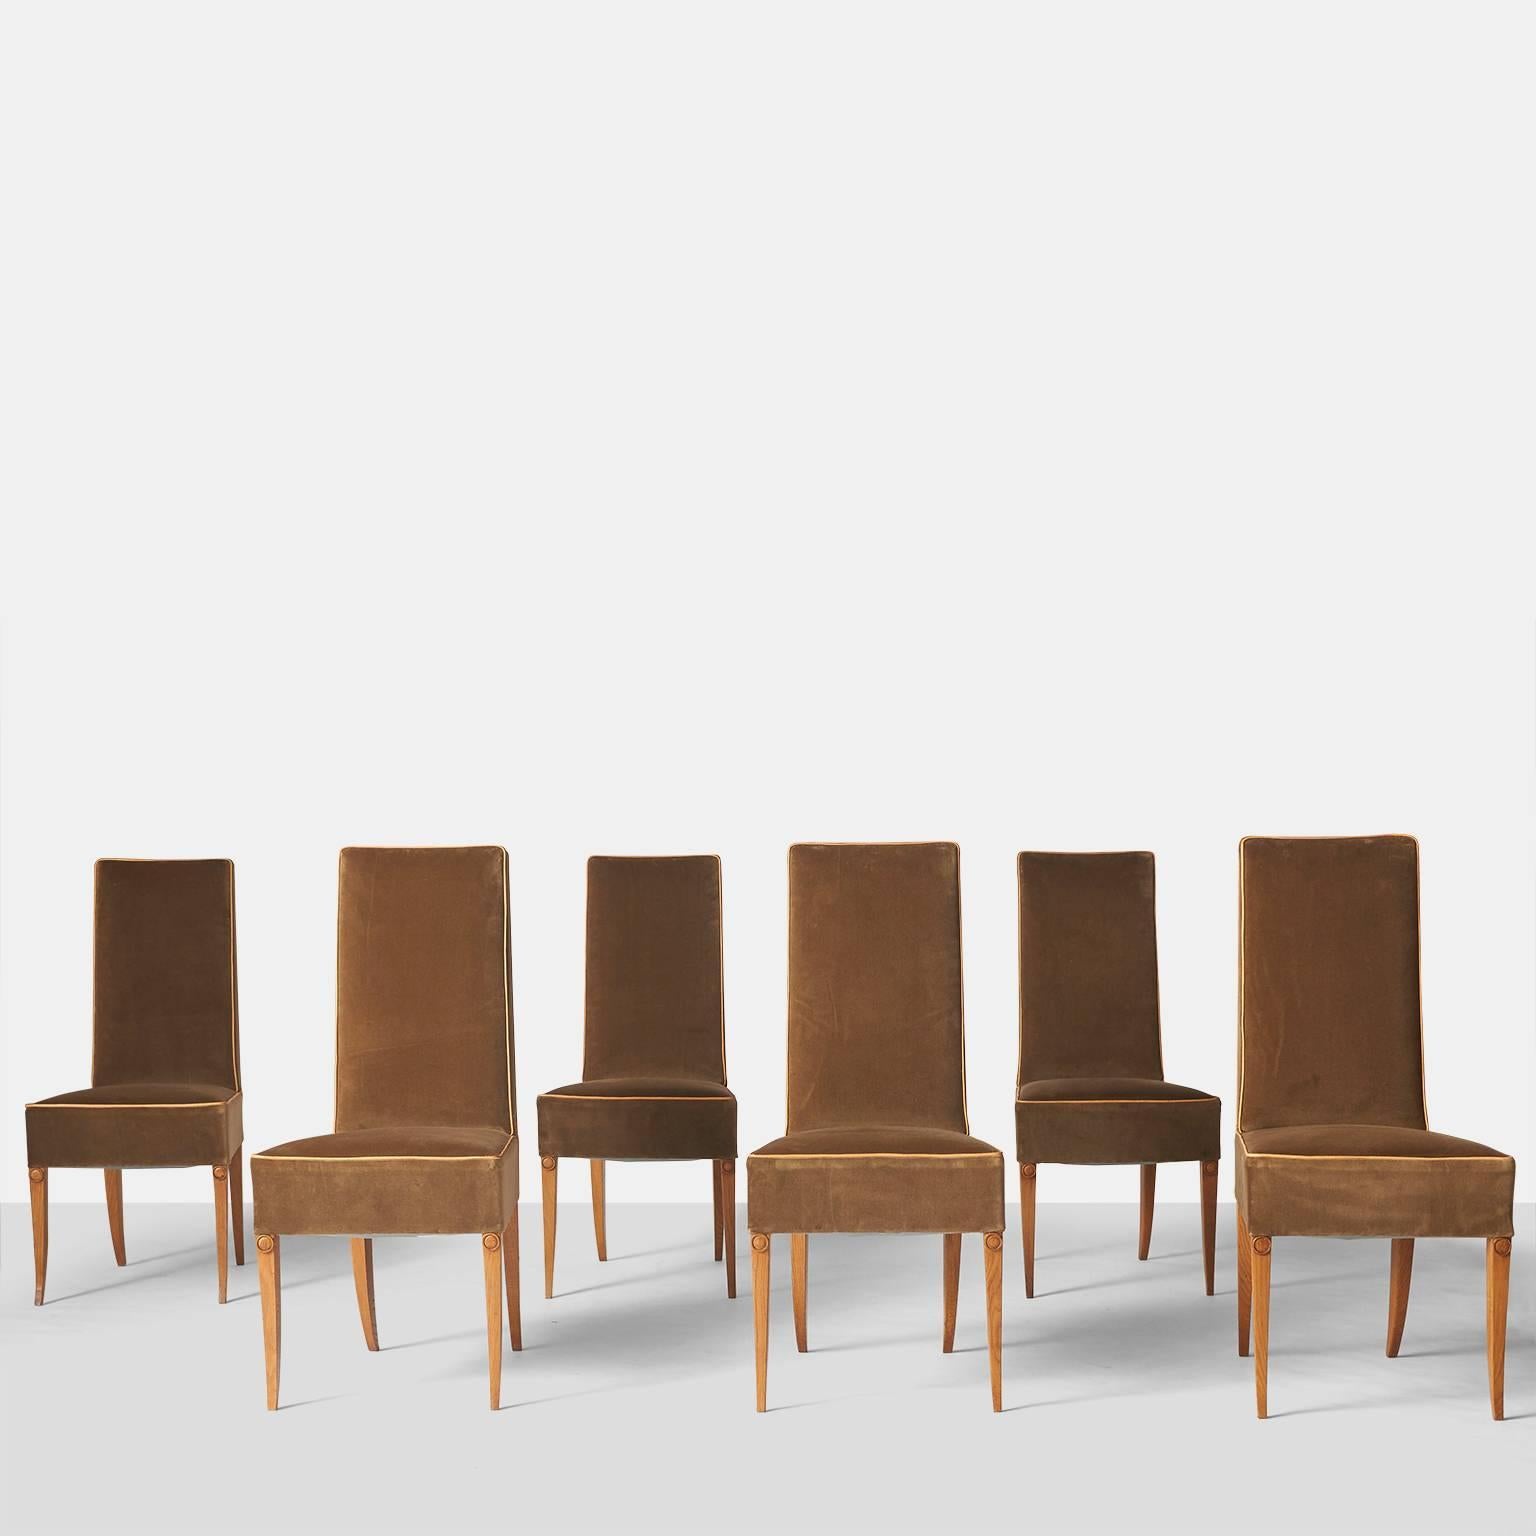 A set of six dining side chairs in limed oak by Andre Arbus upholstered in a brown velvet fabric with contrasting leather trim. The oak frame legs have the Classic flare on the bottom with a circular rosette on top of each leg. Made in France, circa